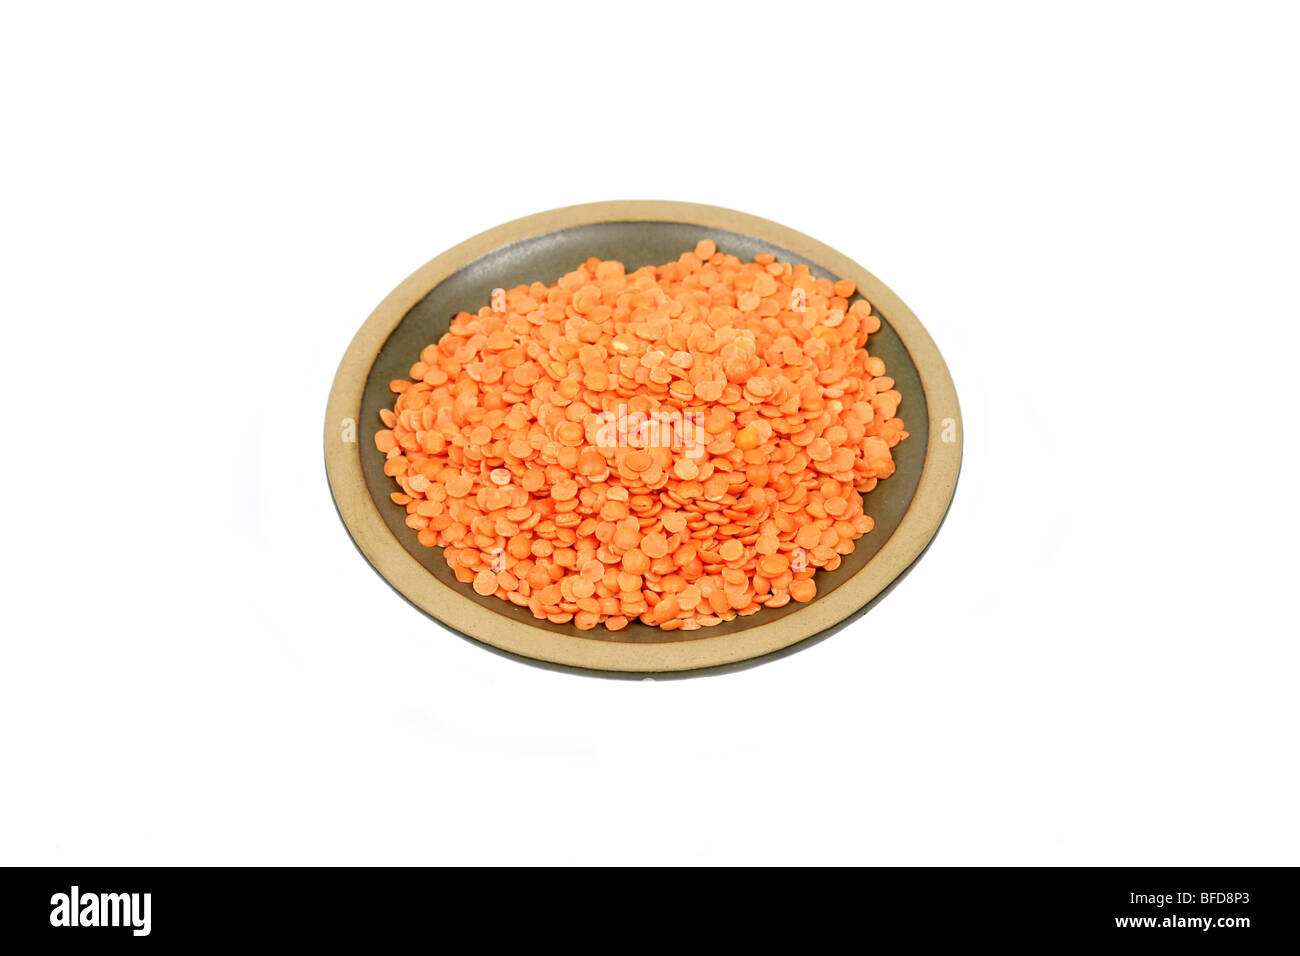 Red Split lentils on a platter against a white background Stock Photo